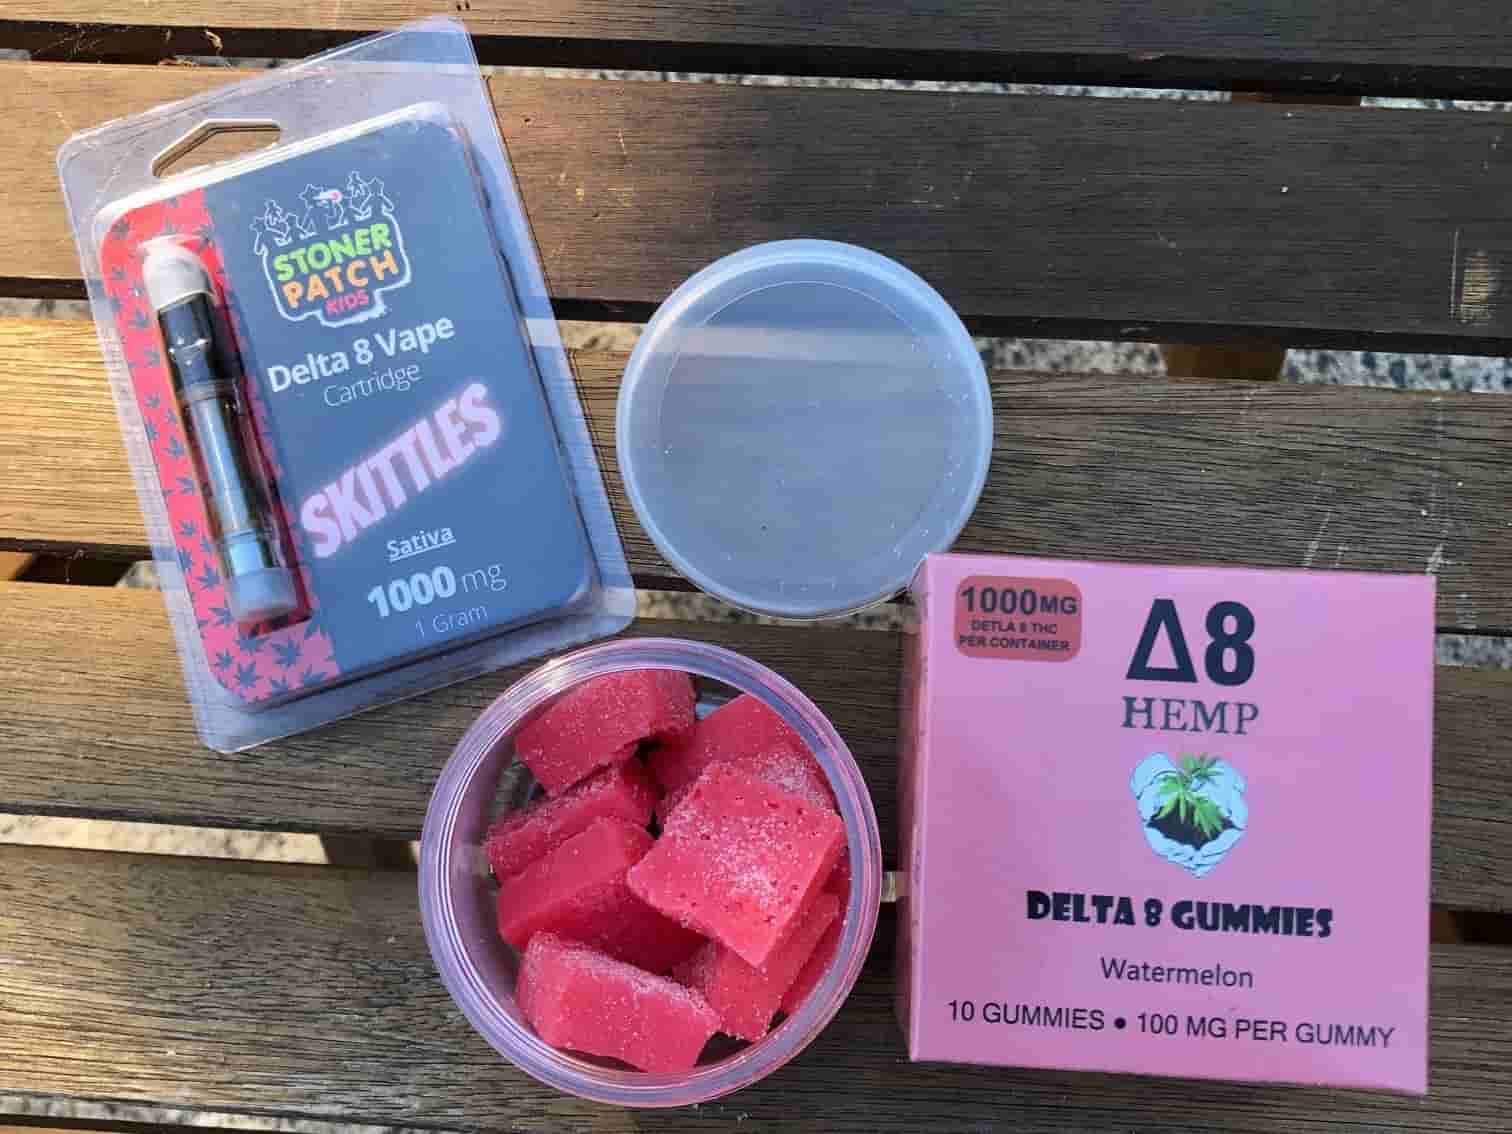 IS DELTA 8 LEGAL IN AZ - Gummies|Thc|Products|Hemp|Product|Brand|Effects|Delta|Gummy|Cbd|Origin|Quality|Dosage|Delta-8|Dose|Usasource|Flavors|Brands|Ingredients|Range|Customers|Edibles|Cartridges|Reviews|Side|List|Health|Cannabis|Lab|Customer|Options|Benefits|Overviewproducts|Research|Time|Market|Drug|Farms|Party|People|Delta-8 Thc|Delta-8 Products|Delta-9 Thc|Delta-8 Gummies|Delta-8 Thc Products|Delta-8 Brands|Customer Reviews|Brand Overviewproducts|Drug Tests|Free Shipping|Similar Benefits|Vape Cartridges|Hemp Doctor|United States|Third Party Lab|Drug Test|Thc Edibles|Health Canada|Cannabis Plant|Side Effects|Organic Hemp|Diamond Cbd|Reaction Time|Legal Hemp|Psychoactive Effects|Psychoactive Properties|Third Party|Dry Eyes|Delta-8 Market|Tolerance Level